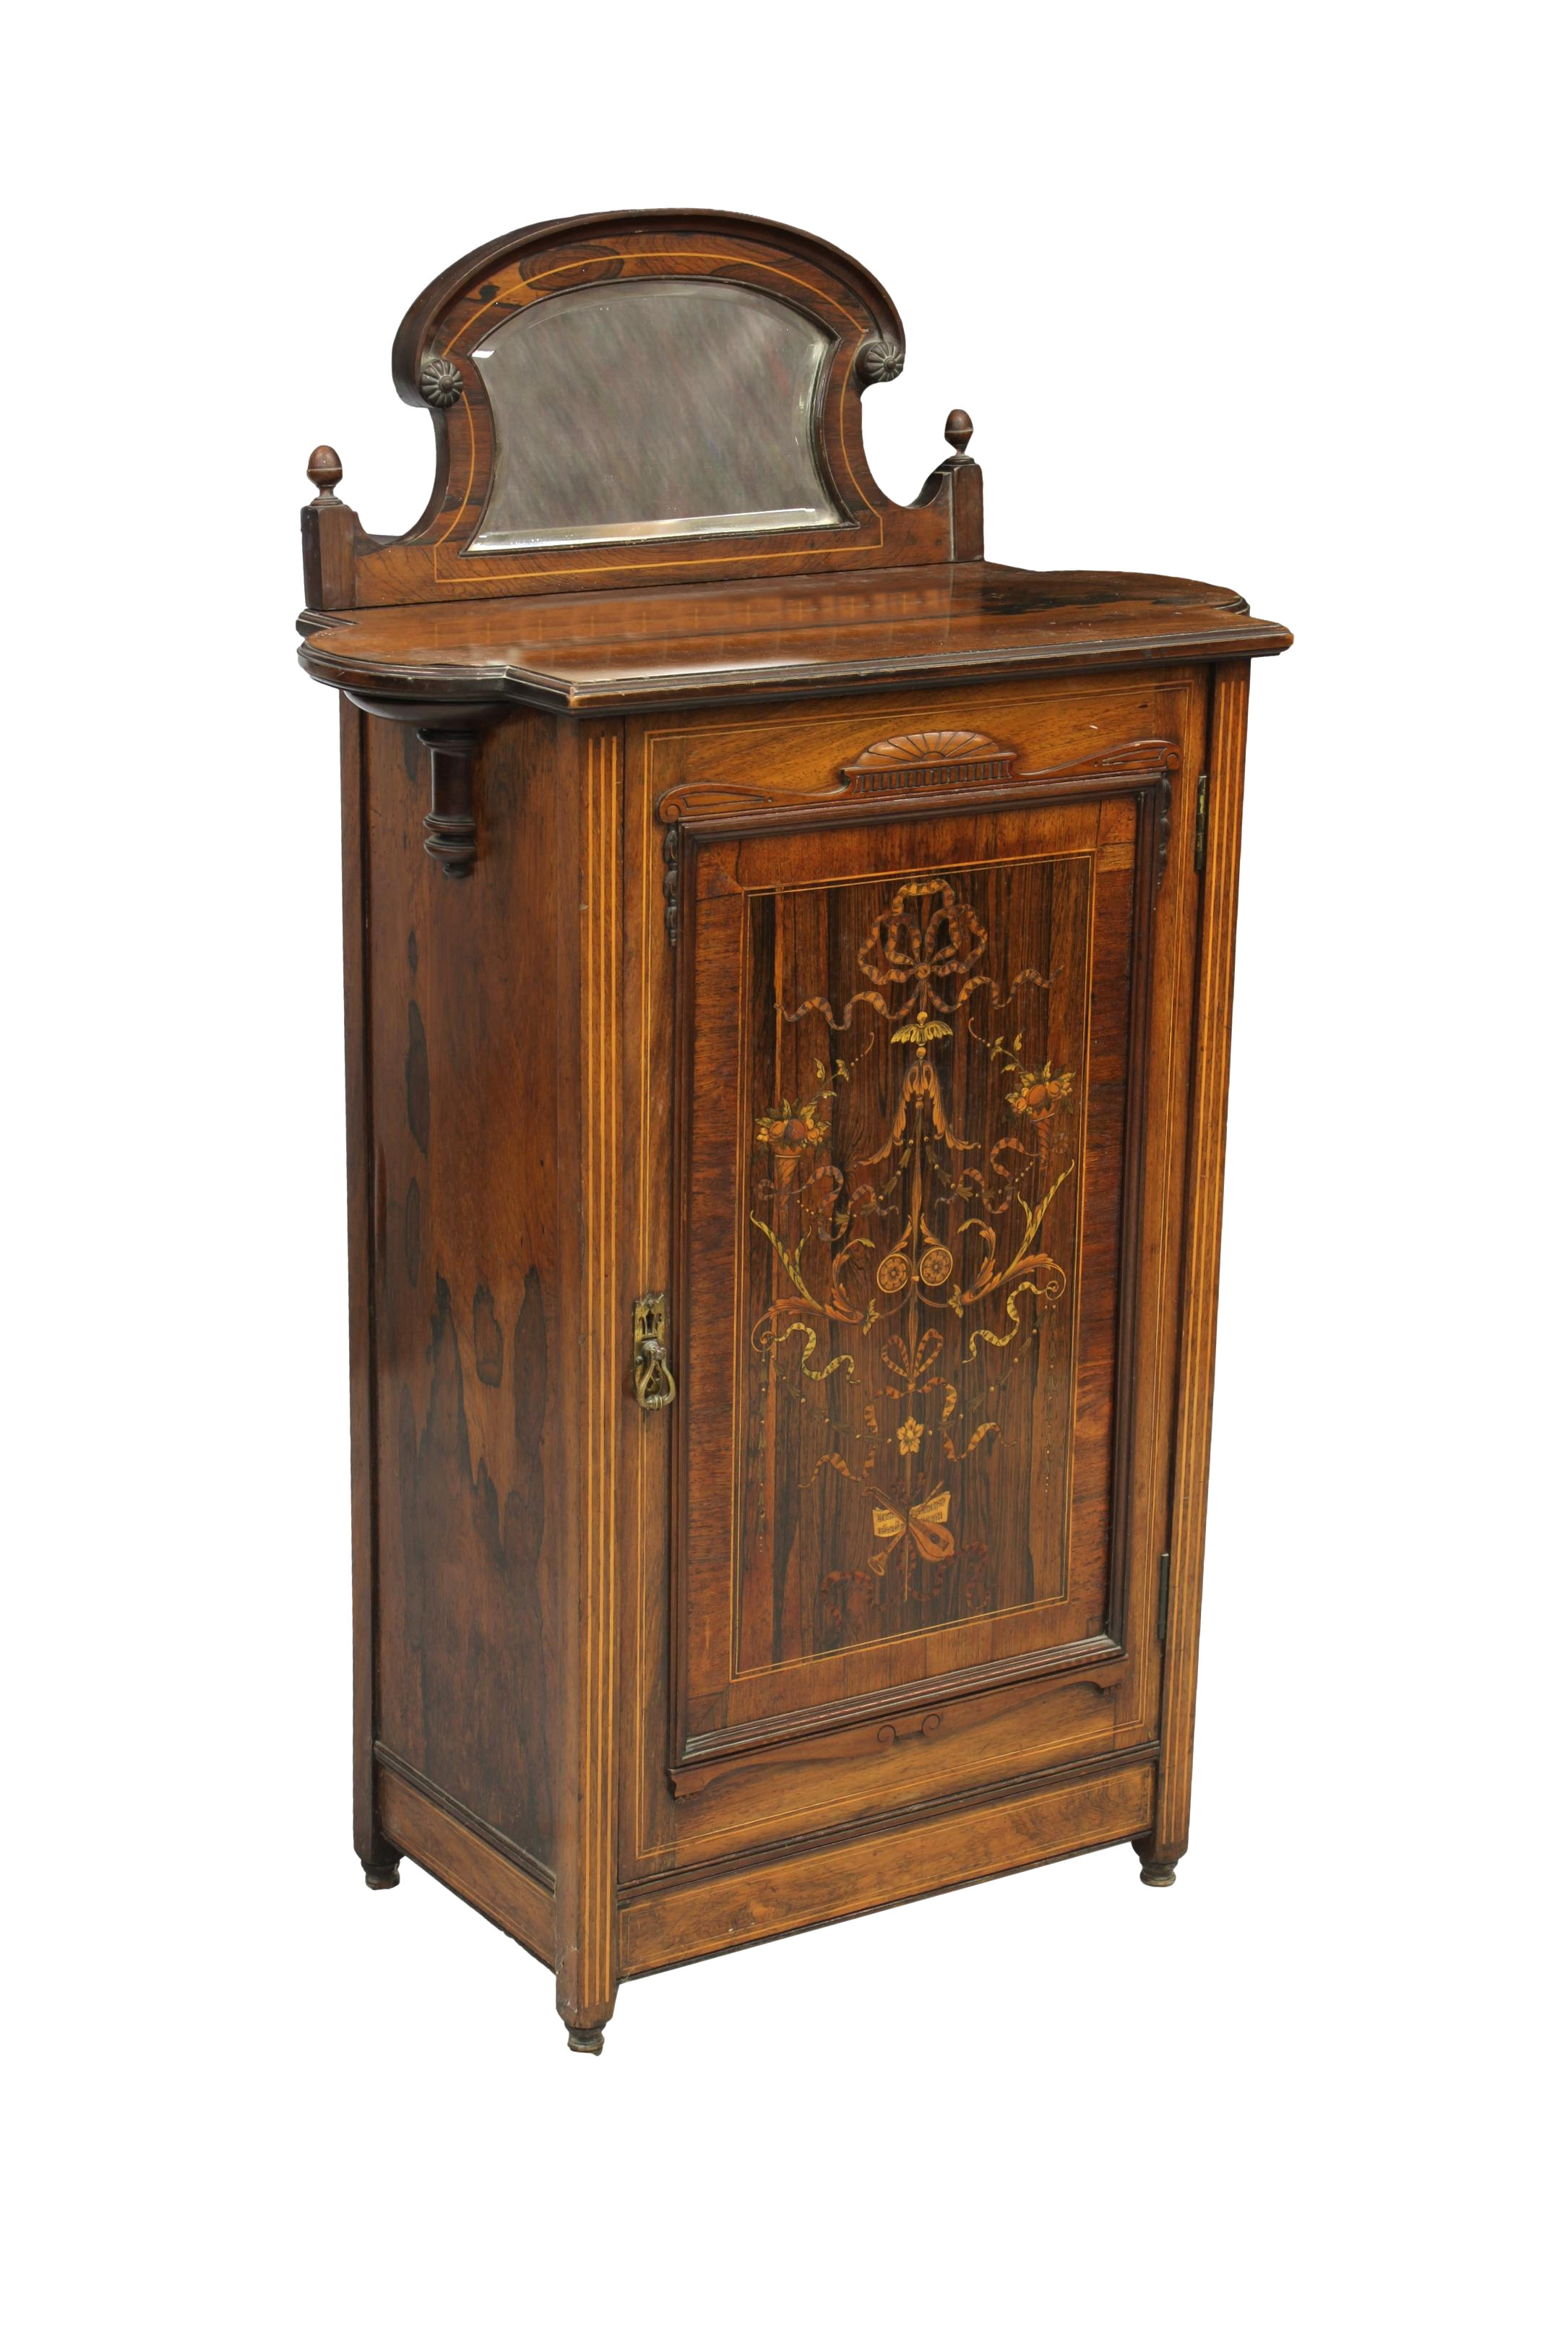 An Edwardian marquetry and rosewood music cabinet